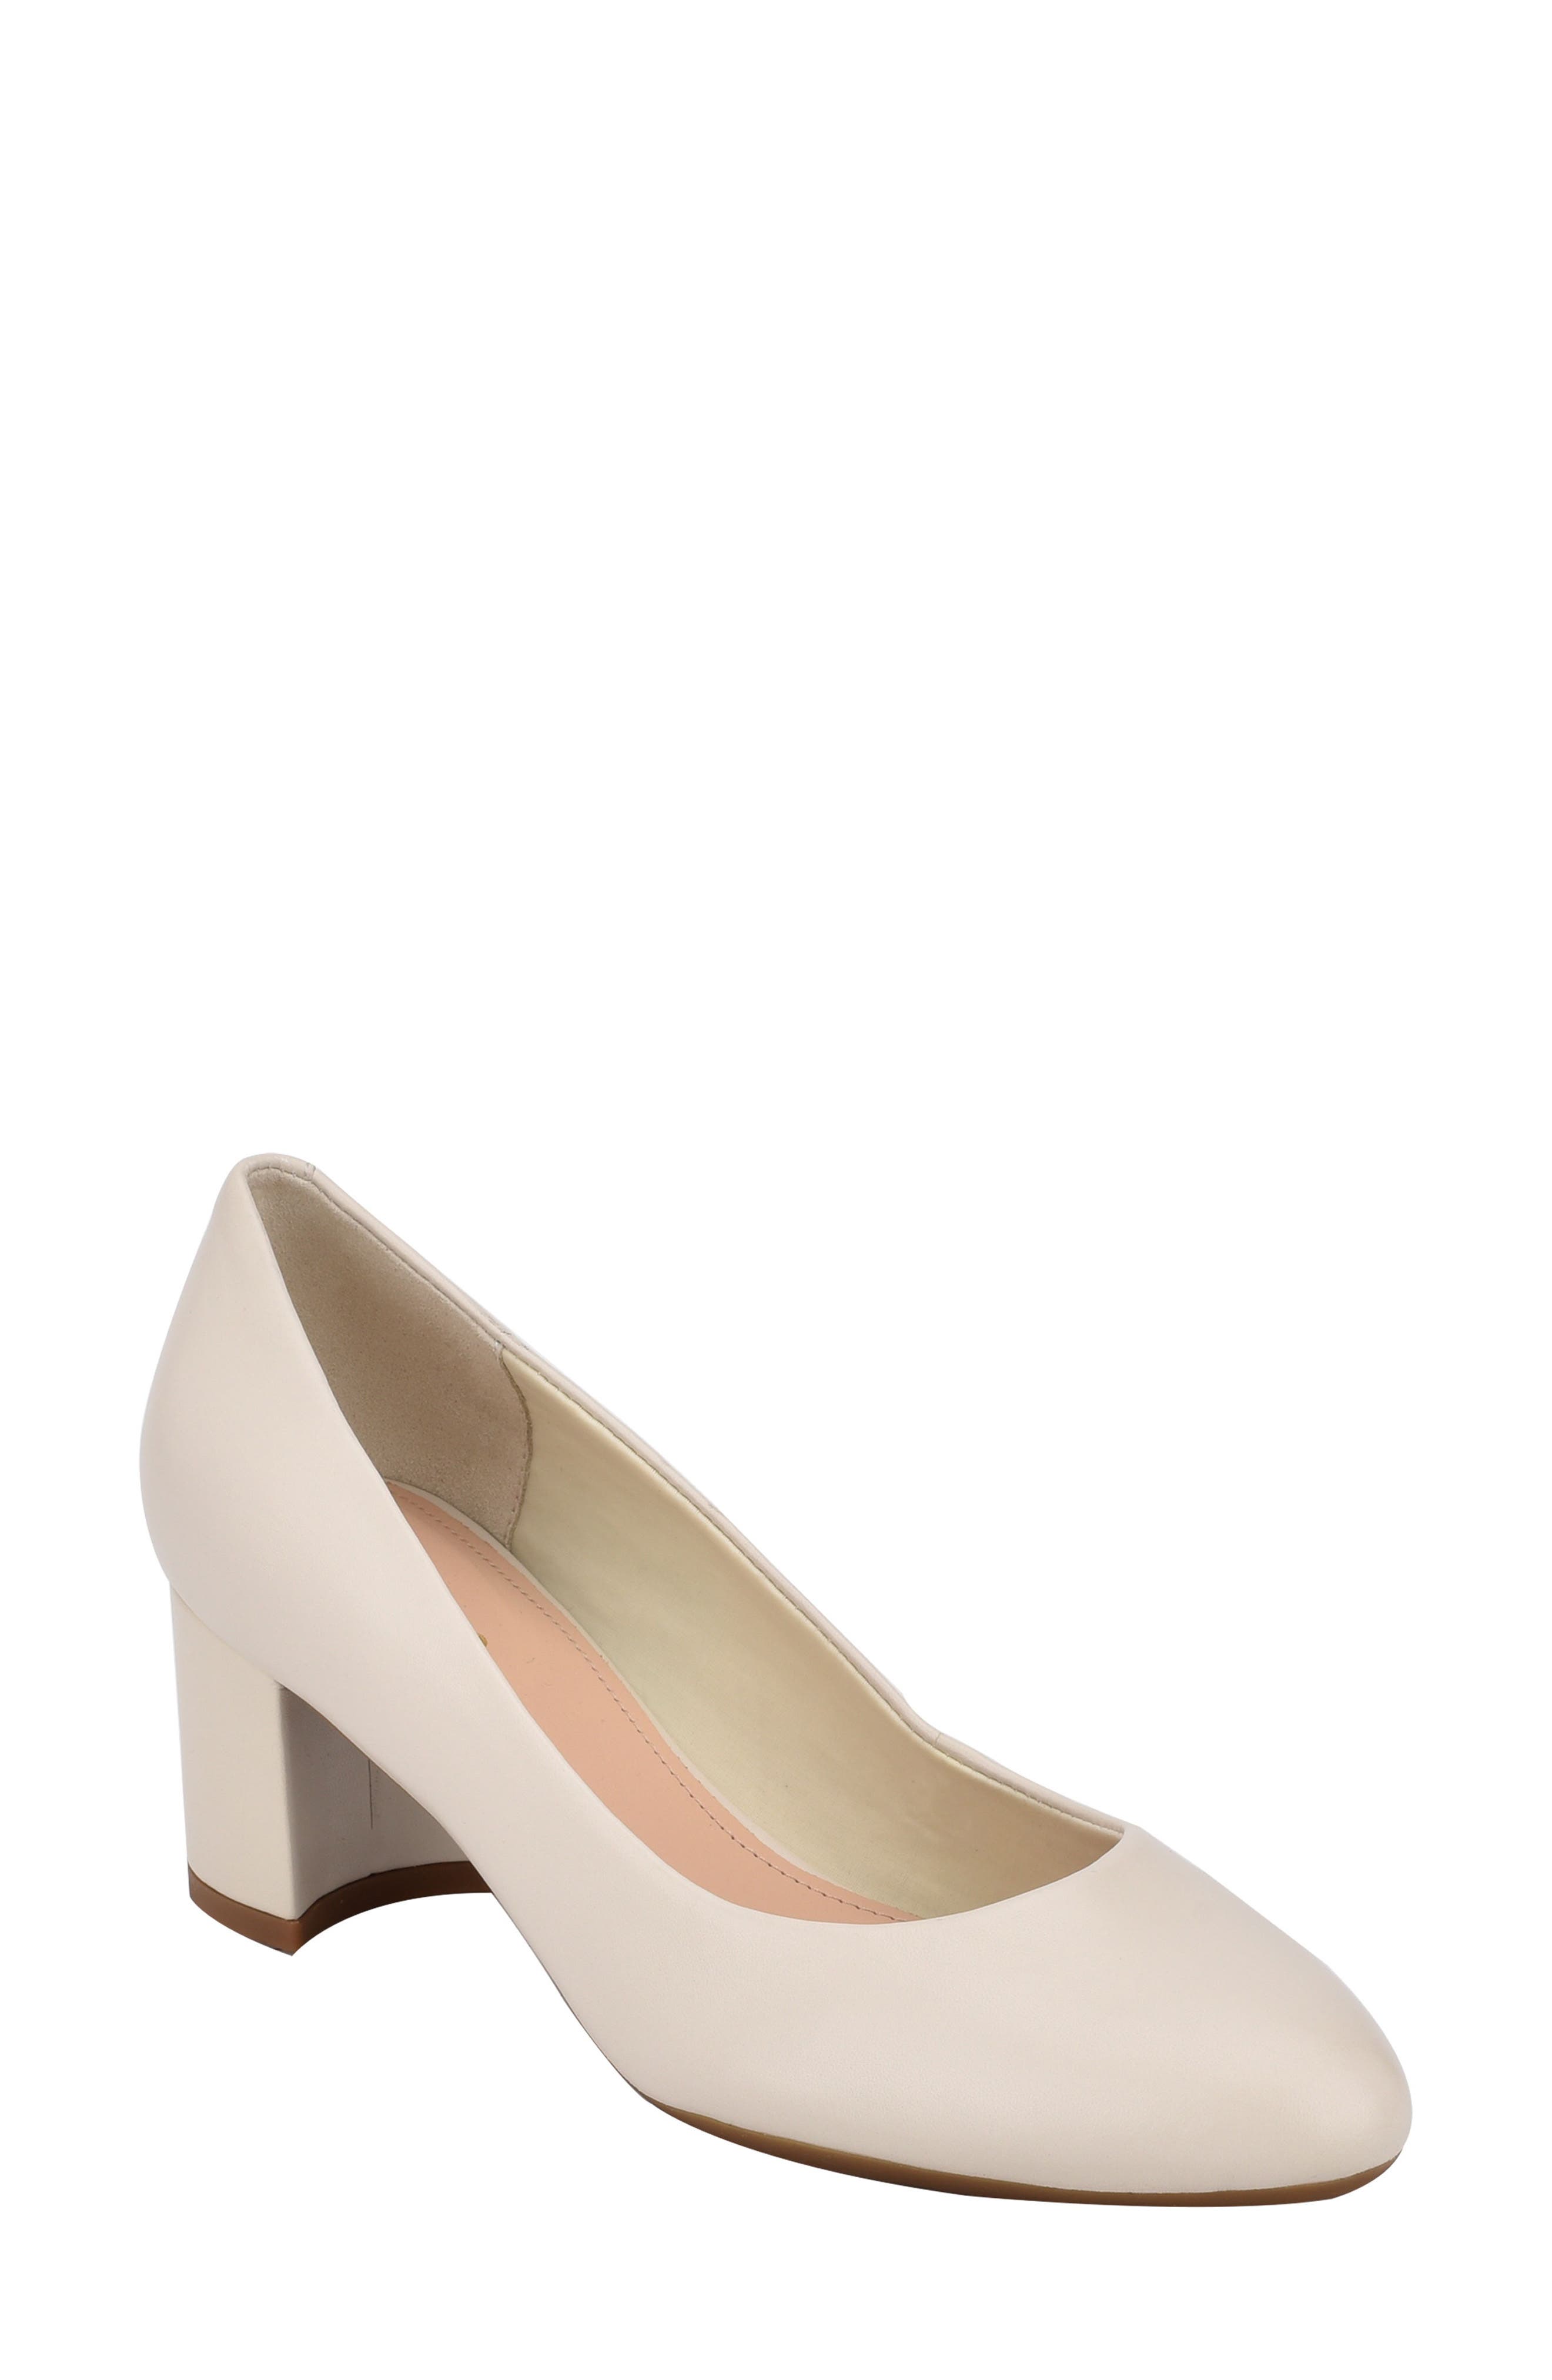 nordstrom wide width womens shoes